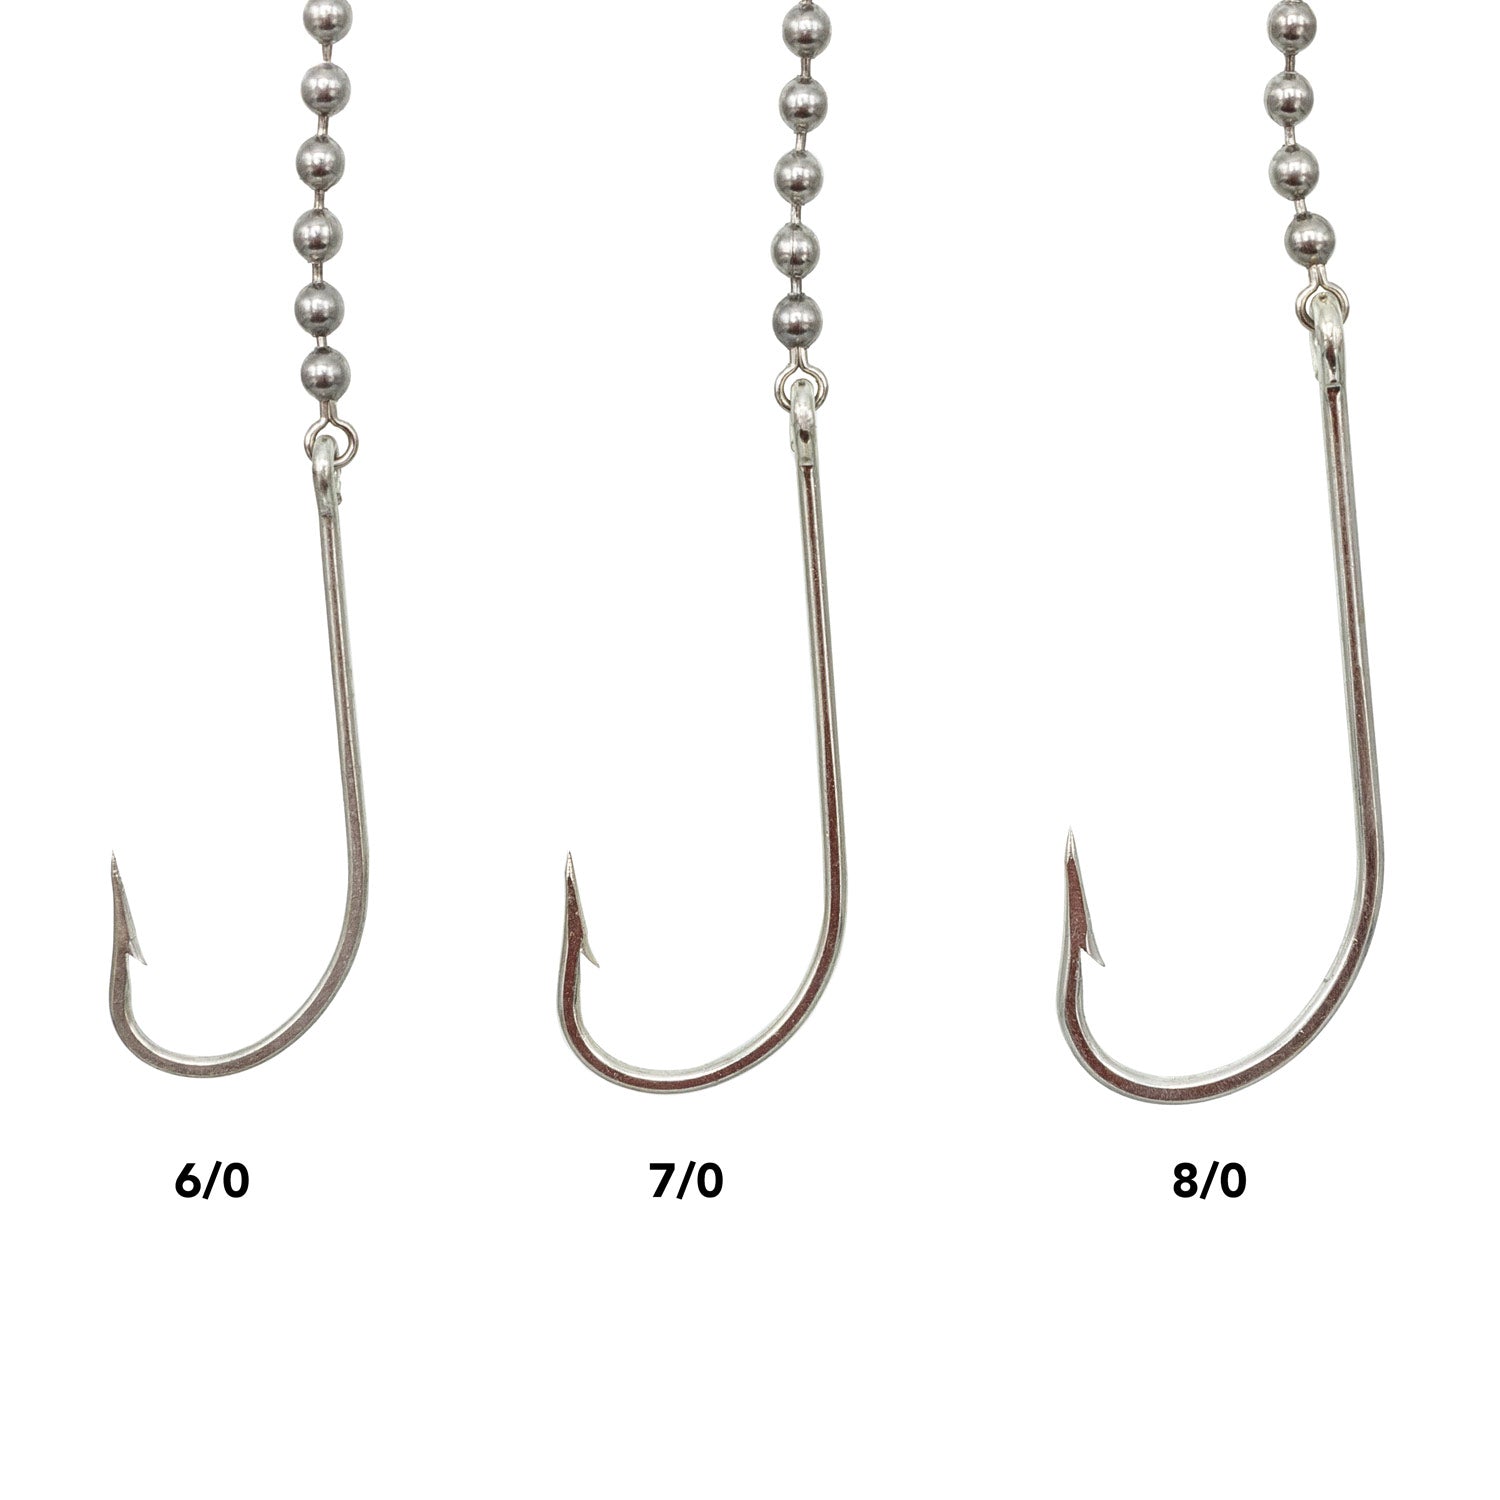 Bead Chain Rigs (2 pack) - 6/0